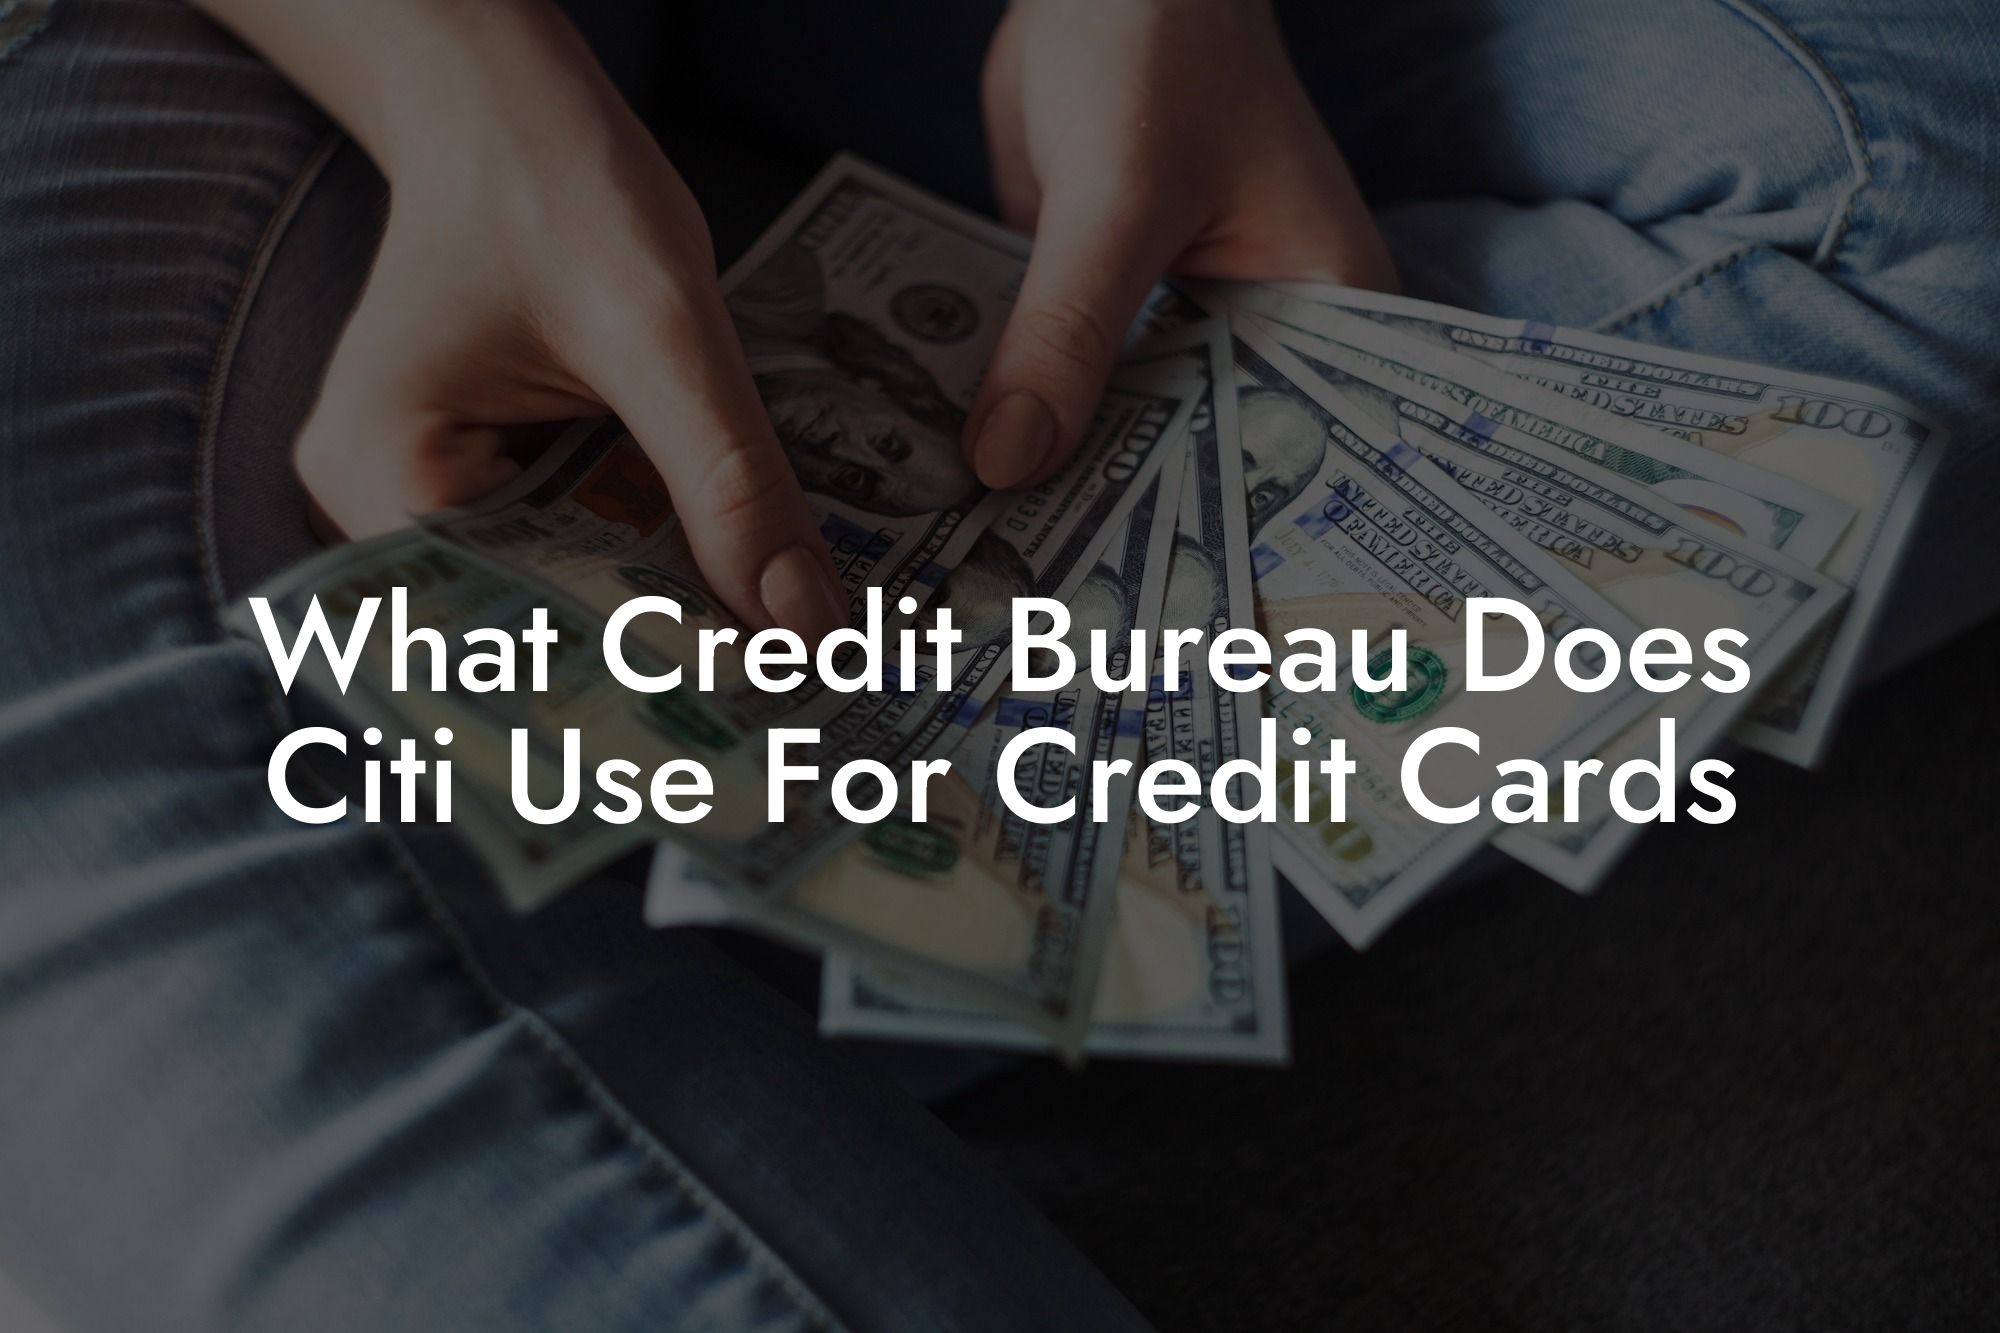 What Credit Bureau Does Citi Use For Credit Cards